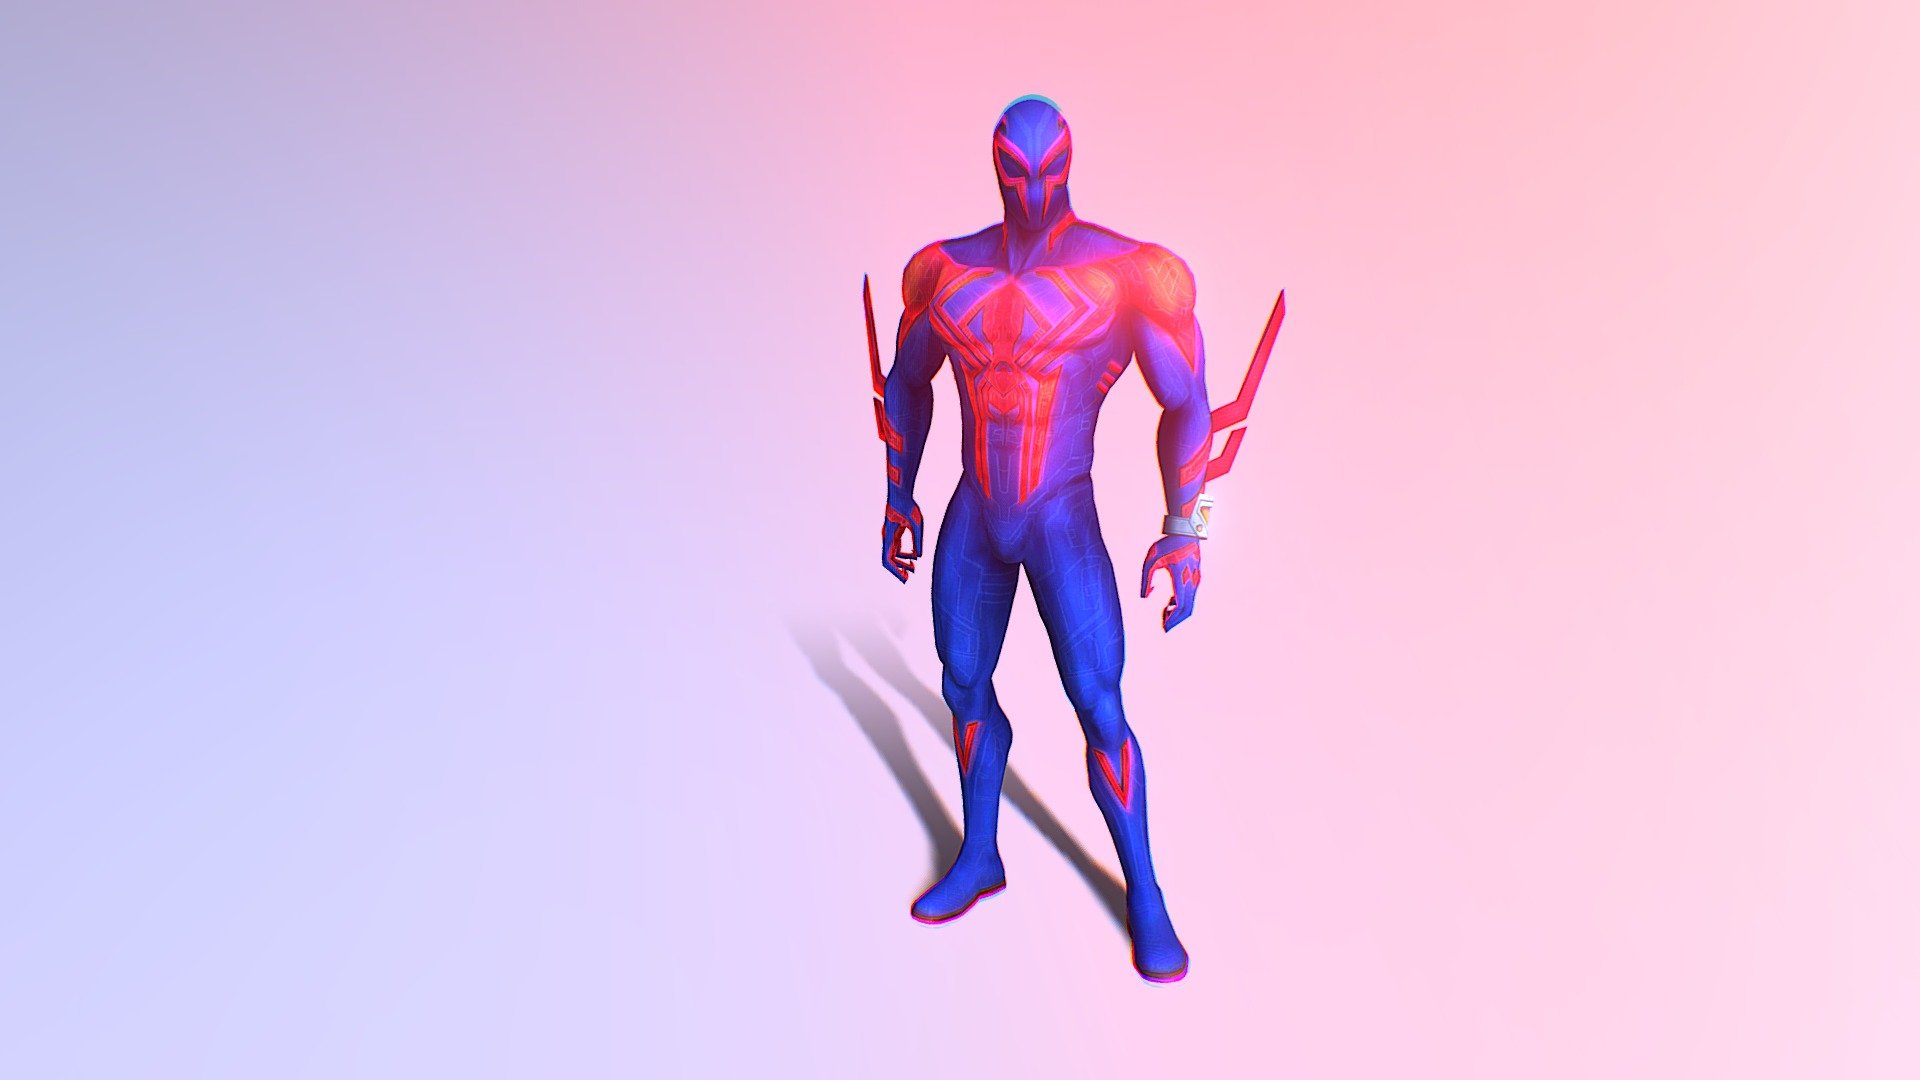 Spider-man 2099 / Miguel O' Hara from Across the Spiderverse
Don't forget to suscribe to my youtube channel - Spider-man 2099 (Across the Spider-verse) - Download Free 3D model by Spiderware 3d model